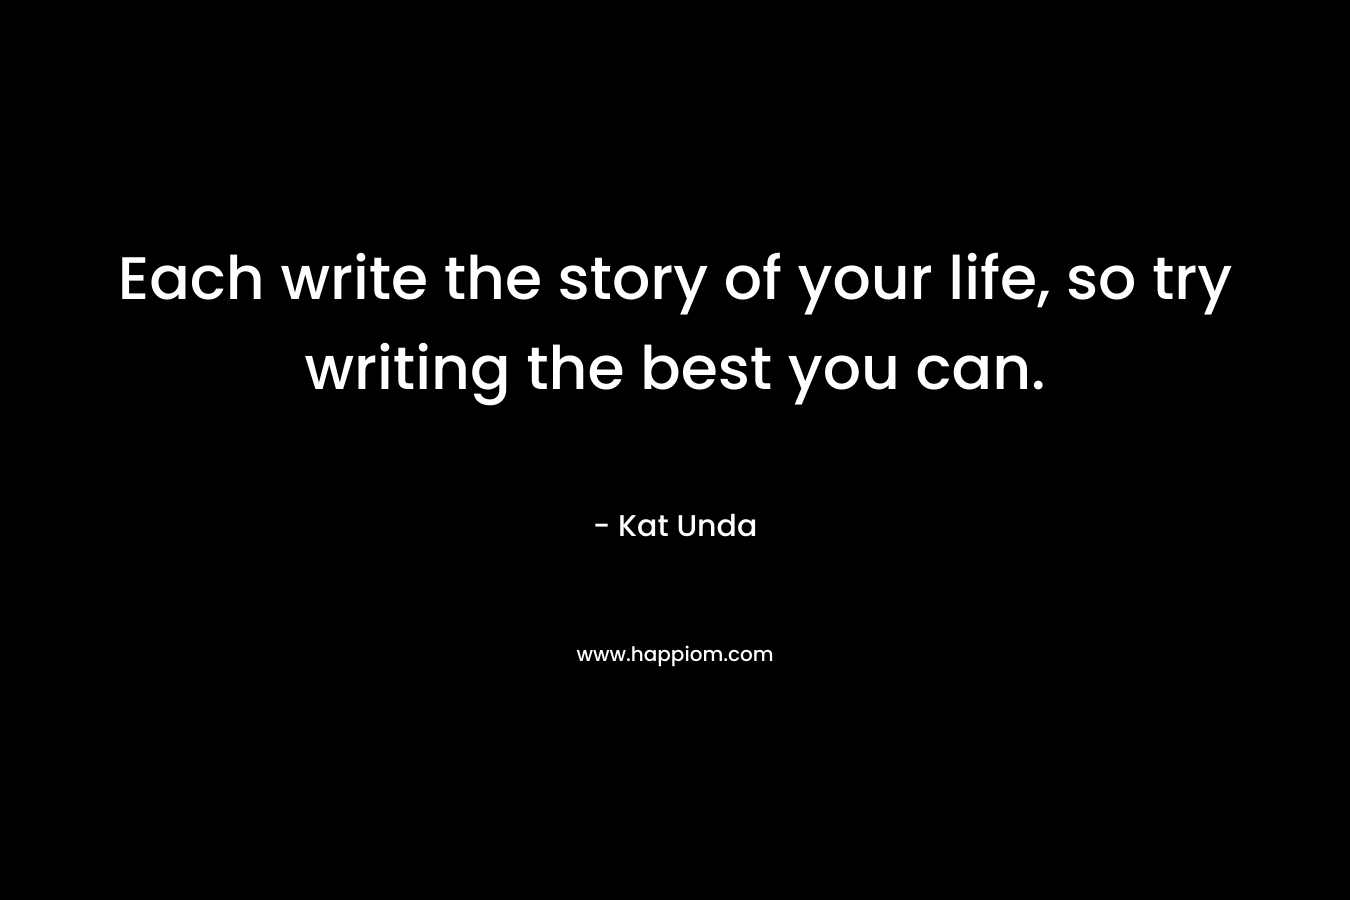 Each write the story of your life, so try writing the best you can.